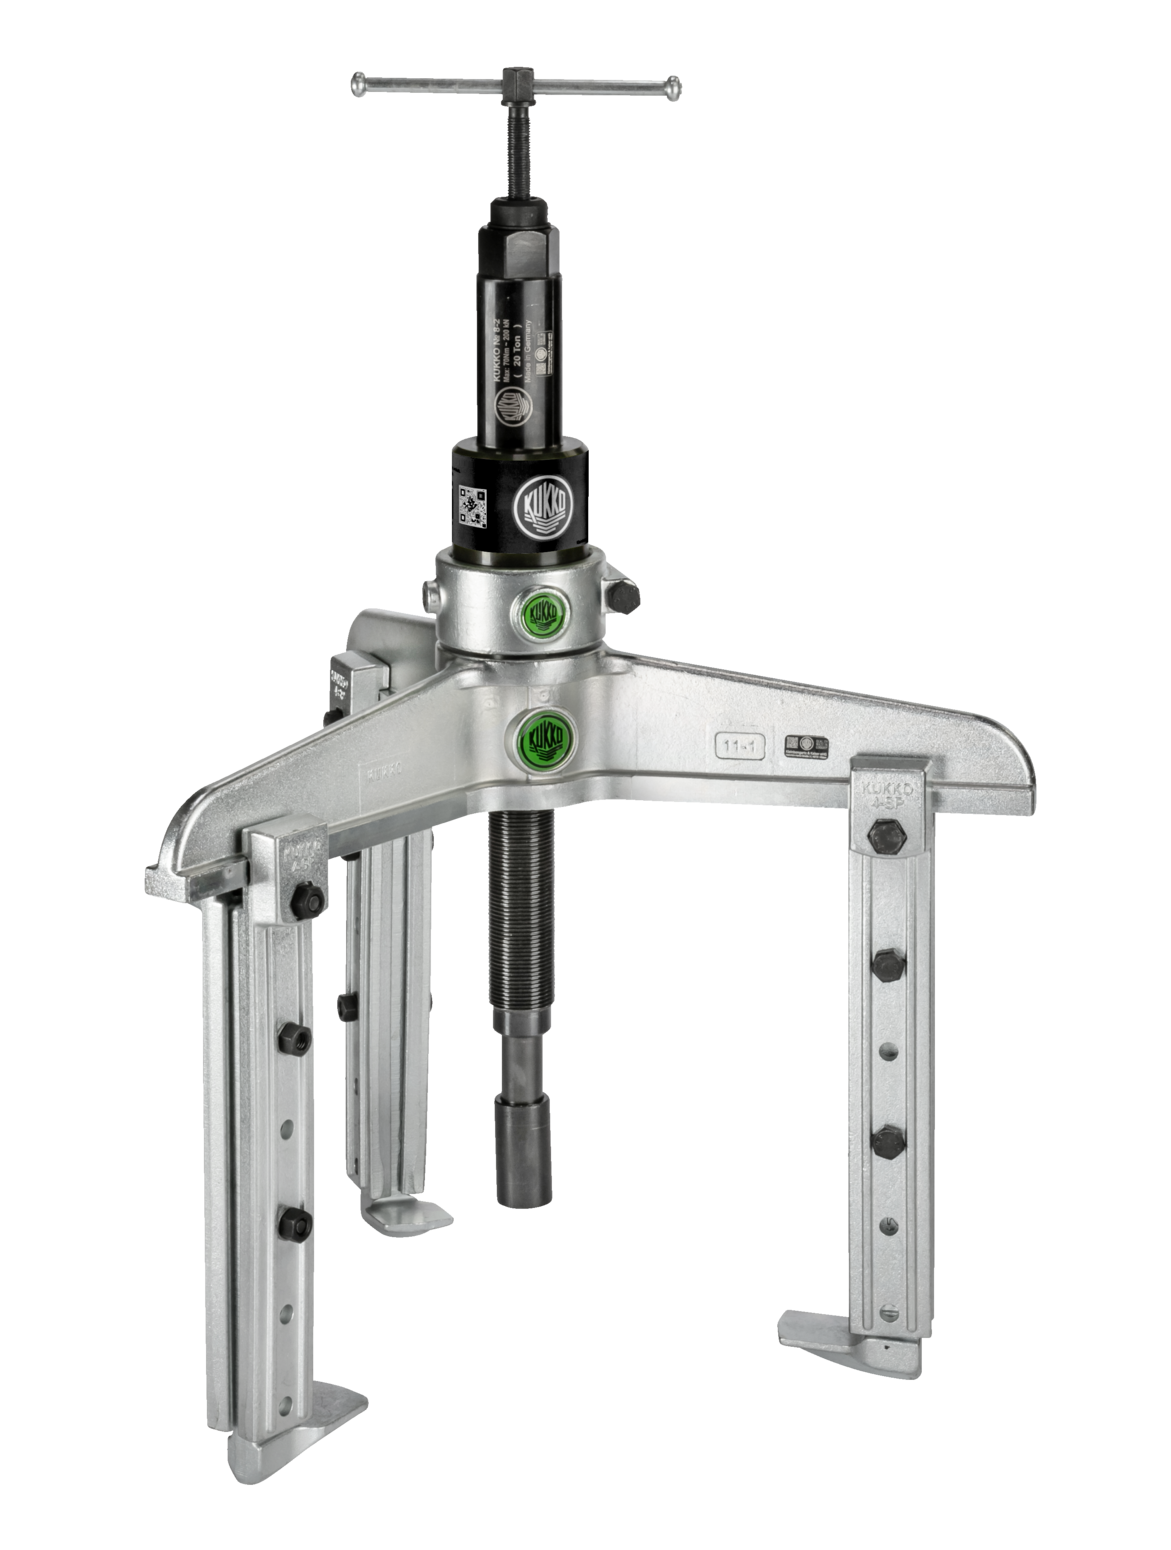 Kukko 11-2-BV Extra strong, 3-arm universal puller with adjustable clamping depth and grease-hydraulic spindle